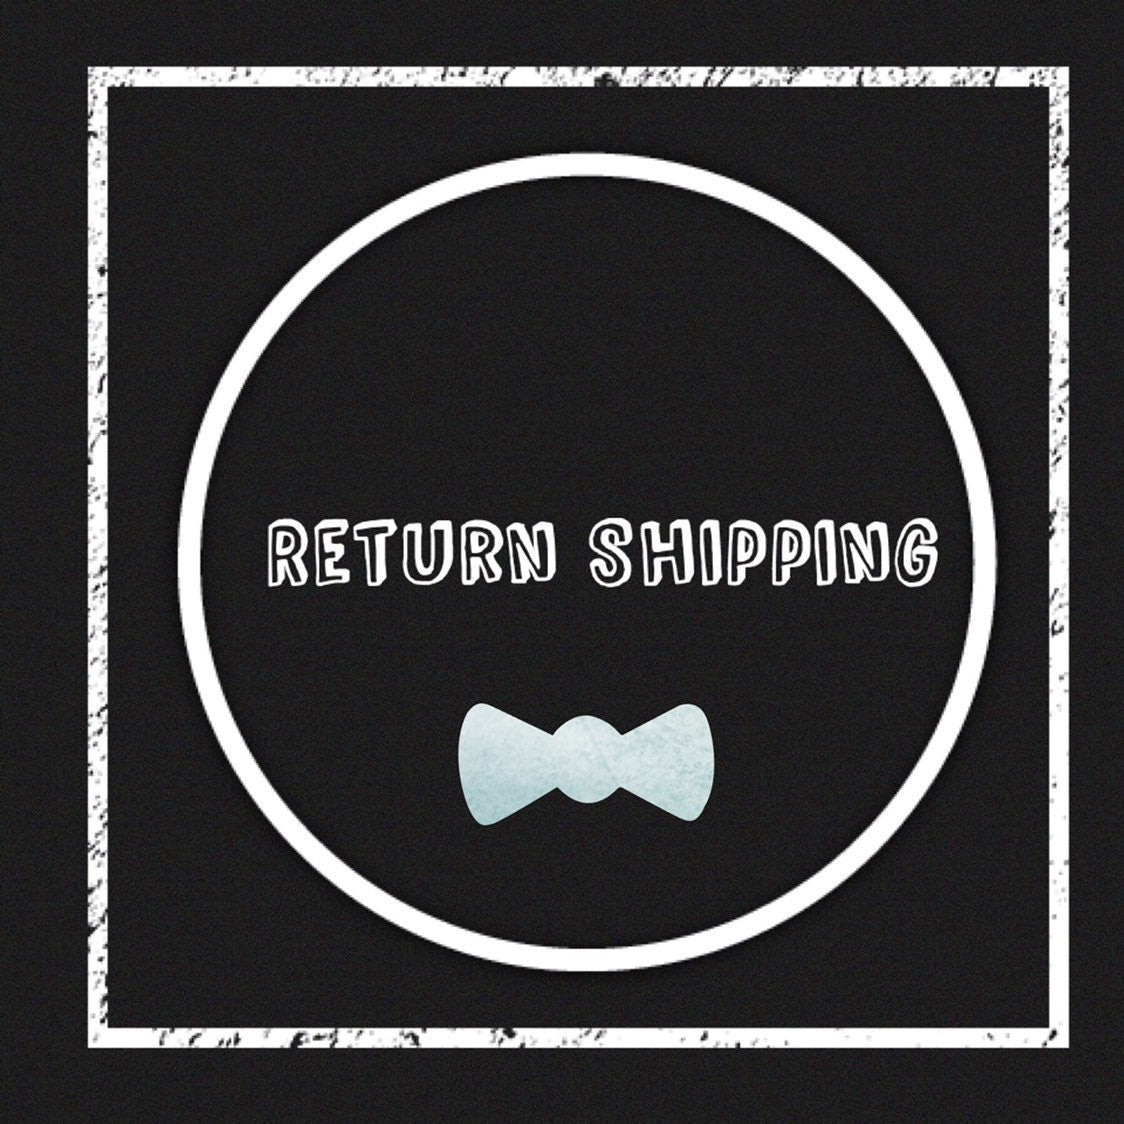 Return Shipping Purchased Here